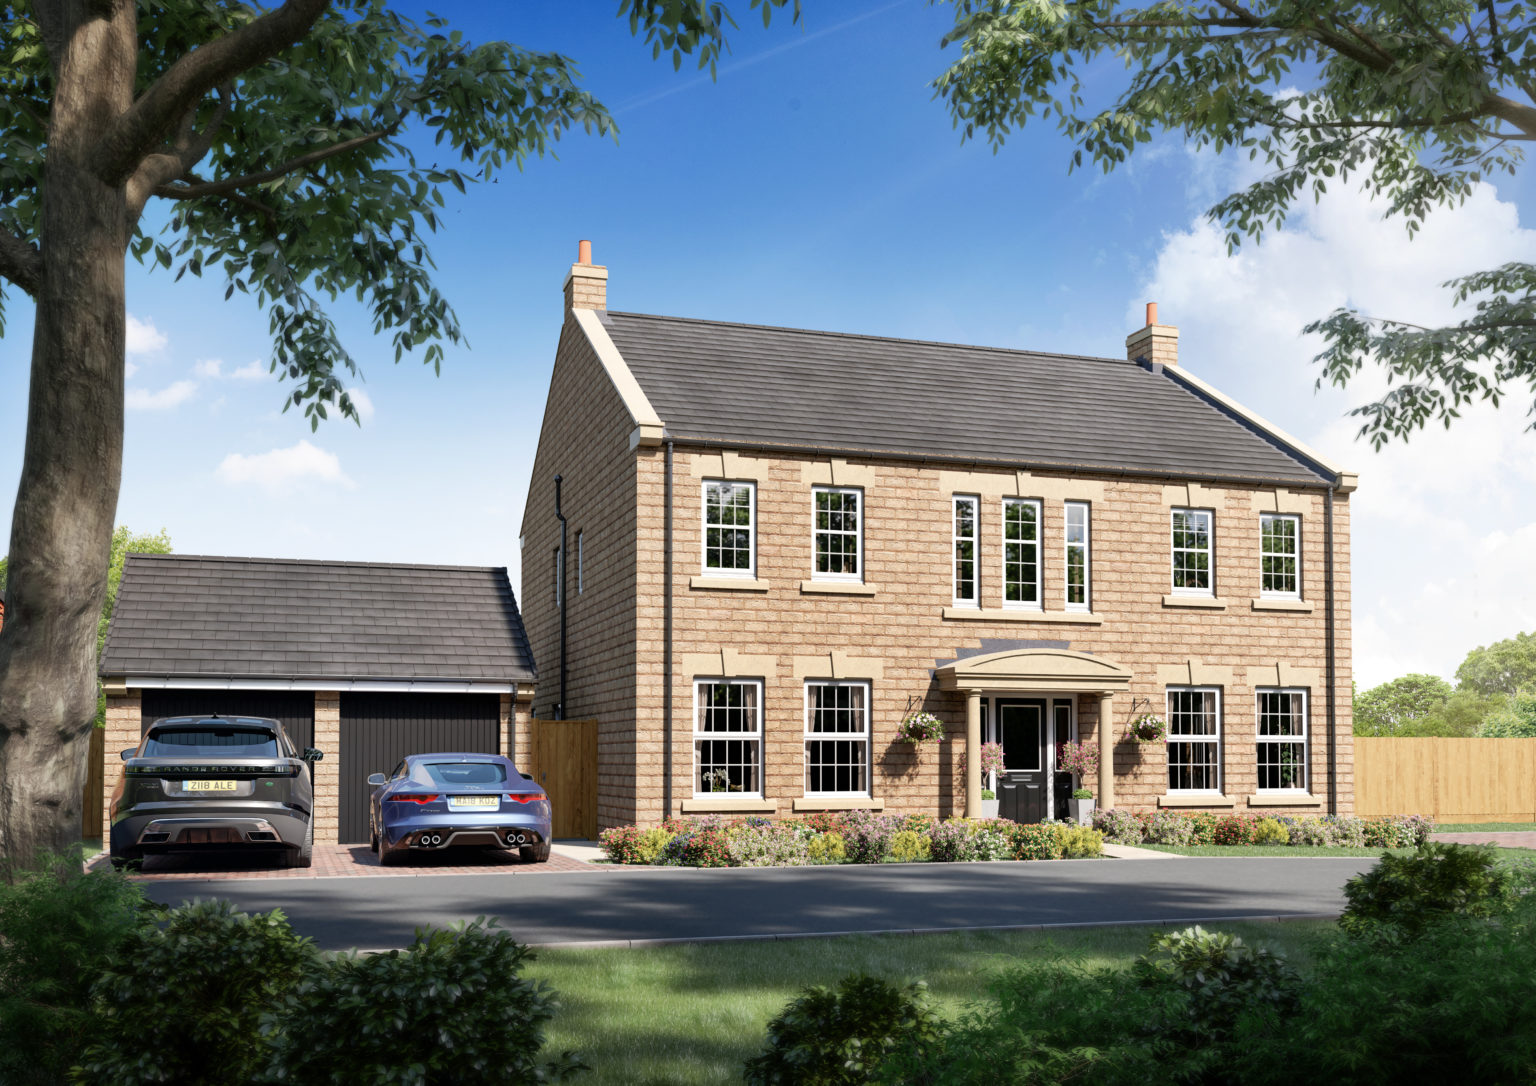 Kings Croft New Build Homes For Sale North Yorkshire Harron Homes